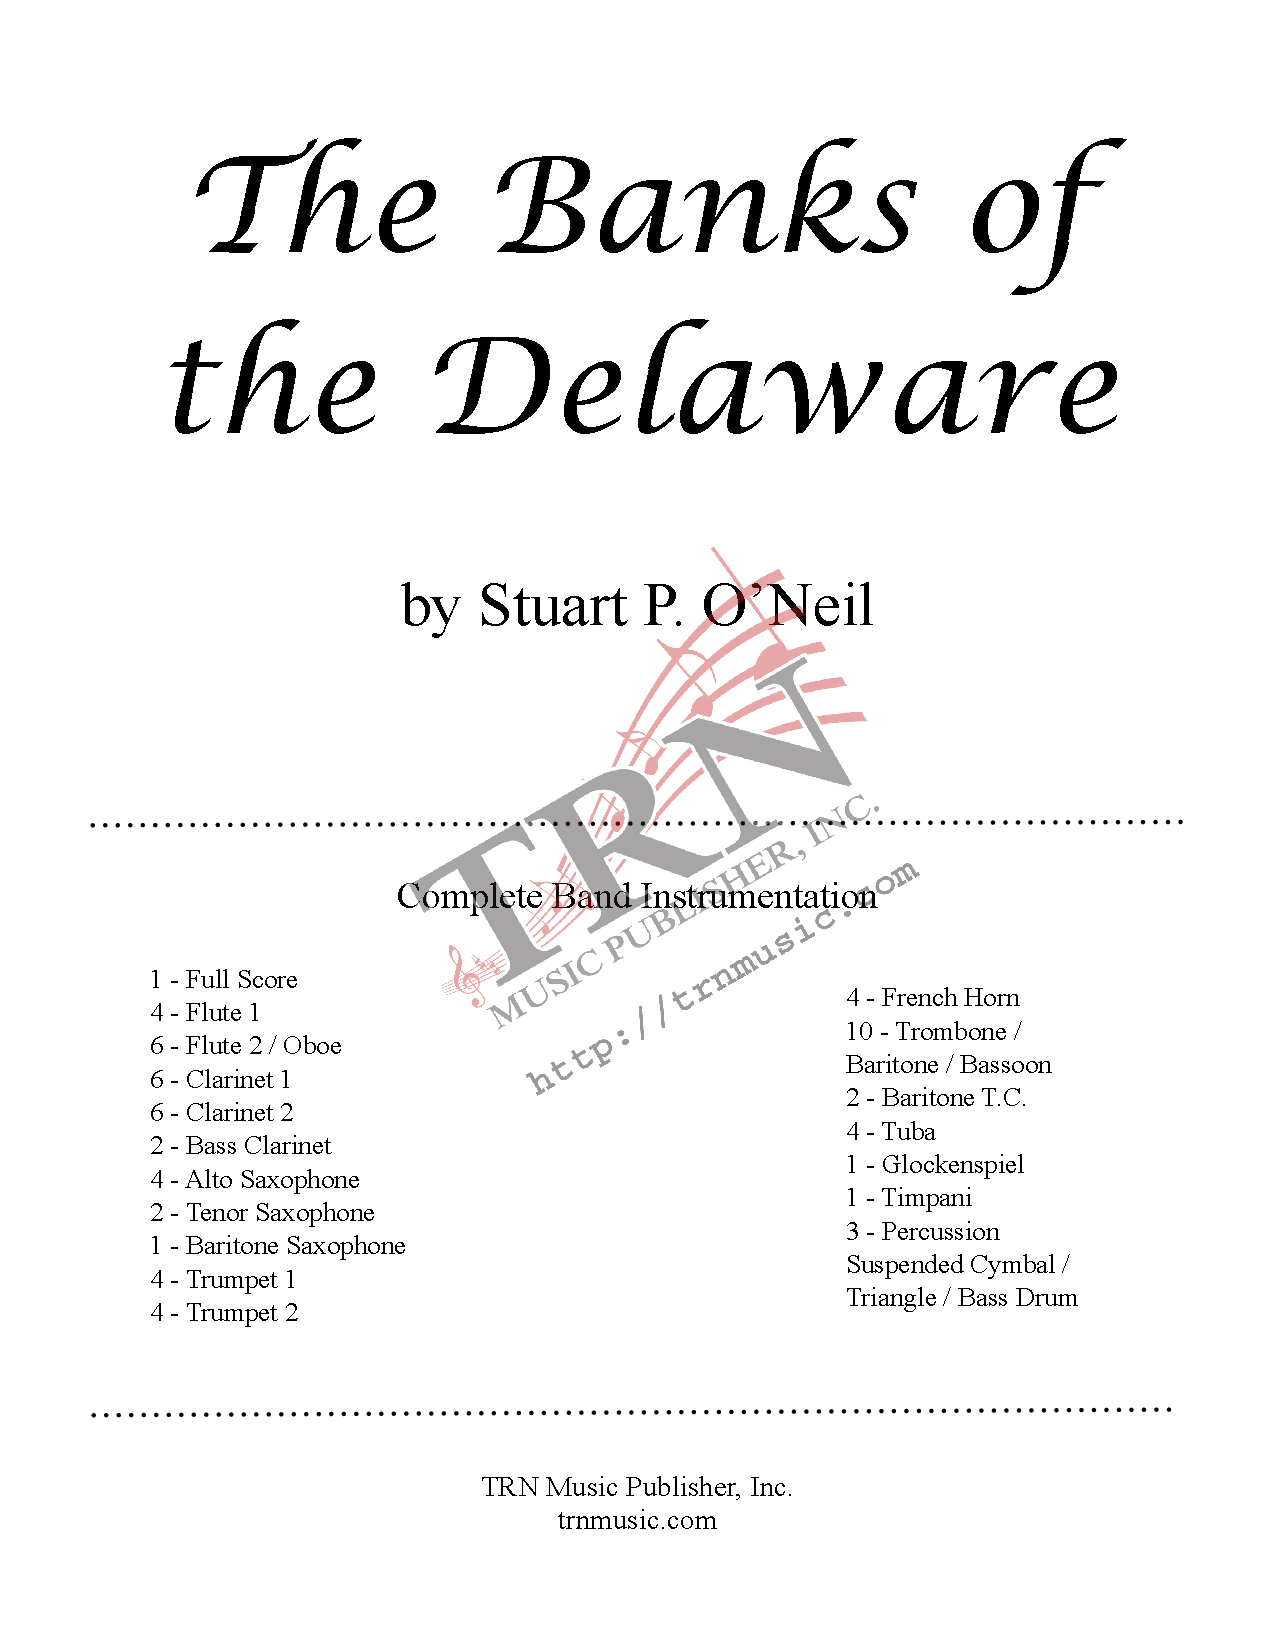 The Banks of the Delaware